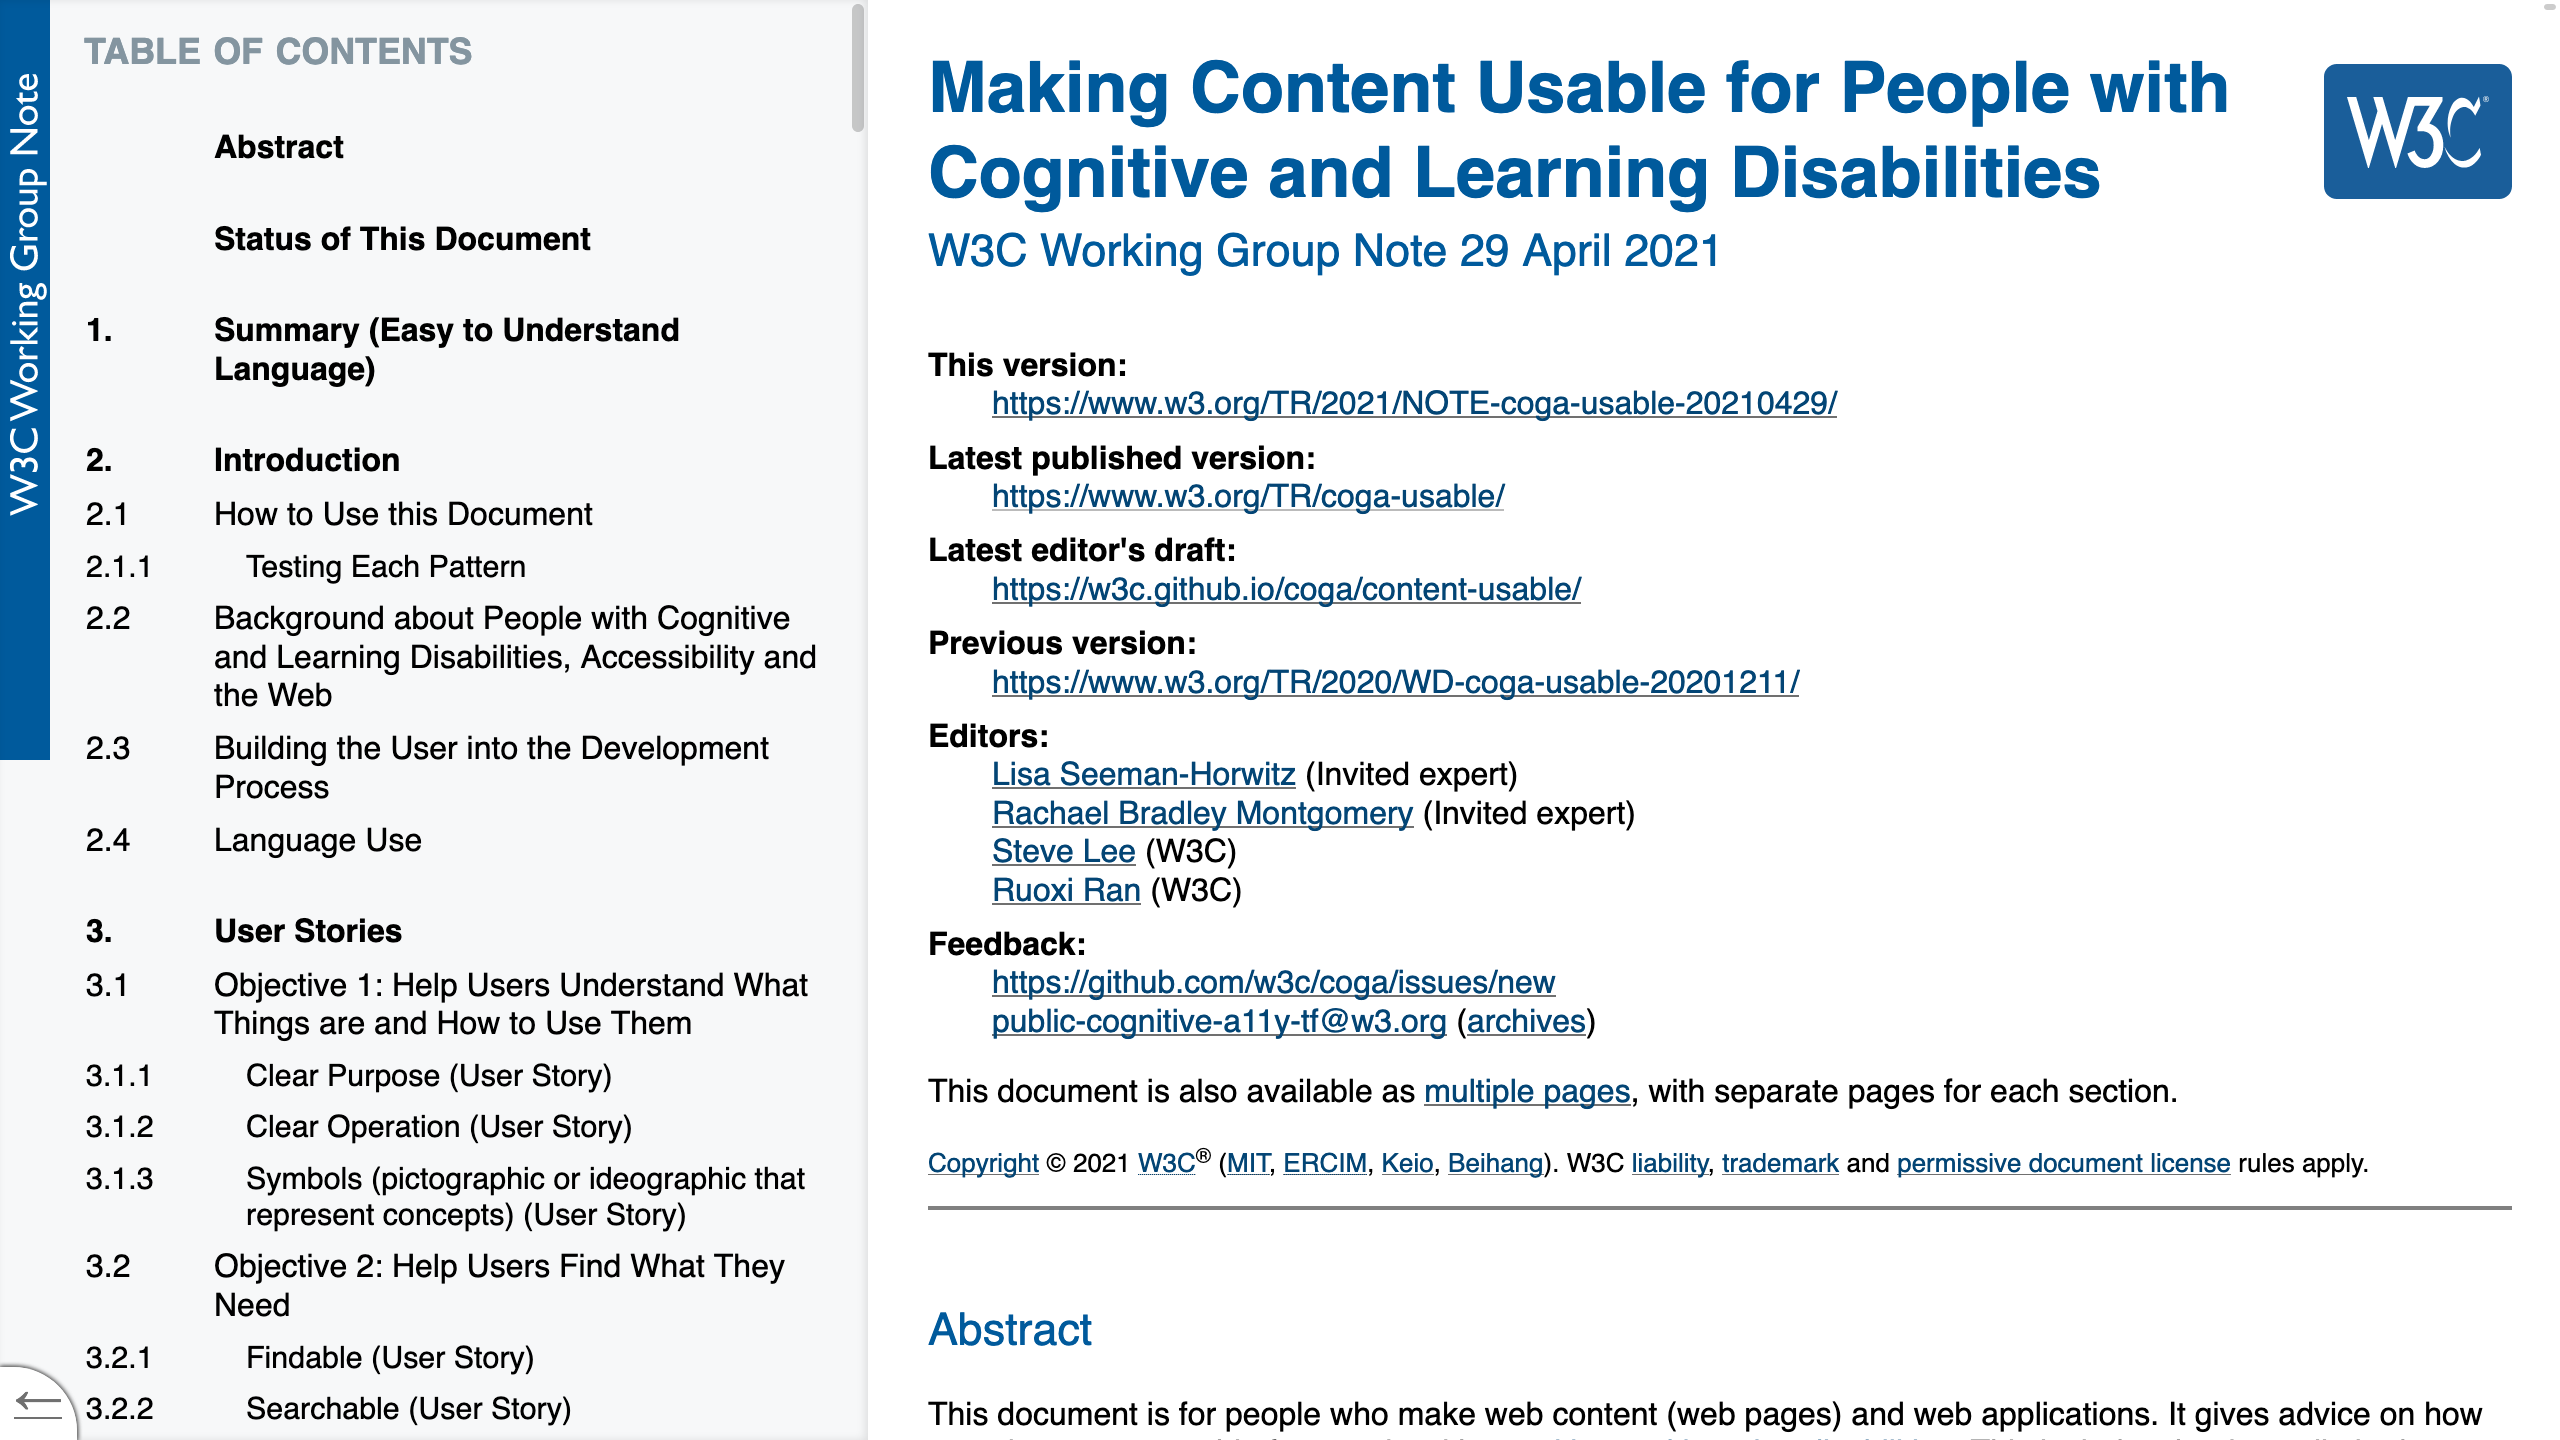 The Cognitive and Learning Disabilities Accessibility Task Force's document on making content usable